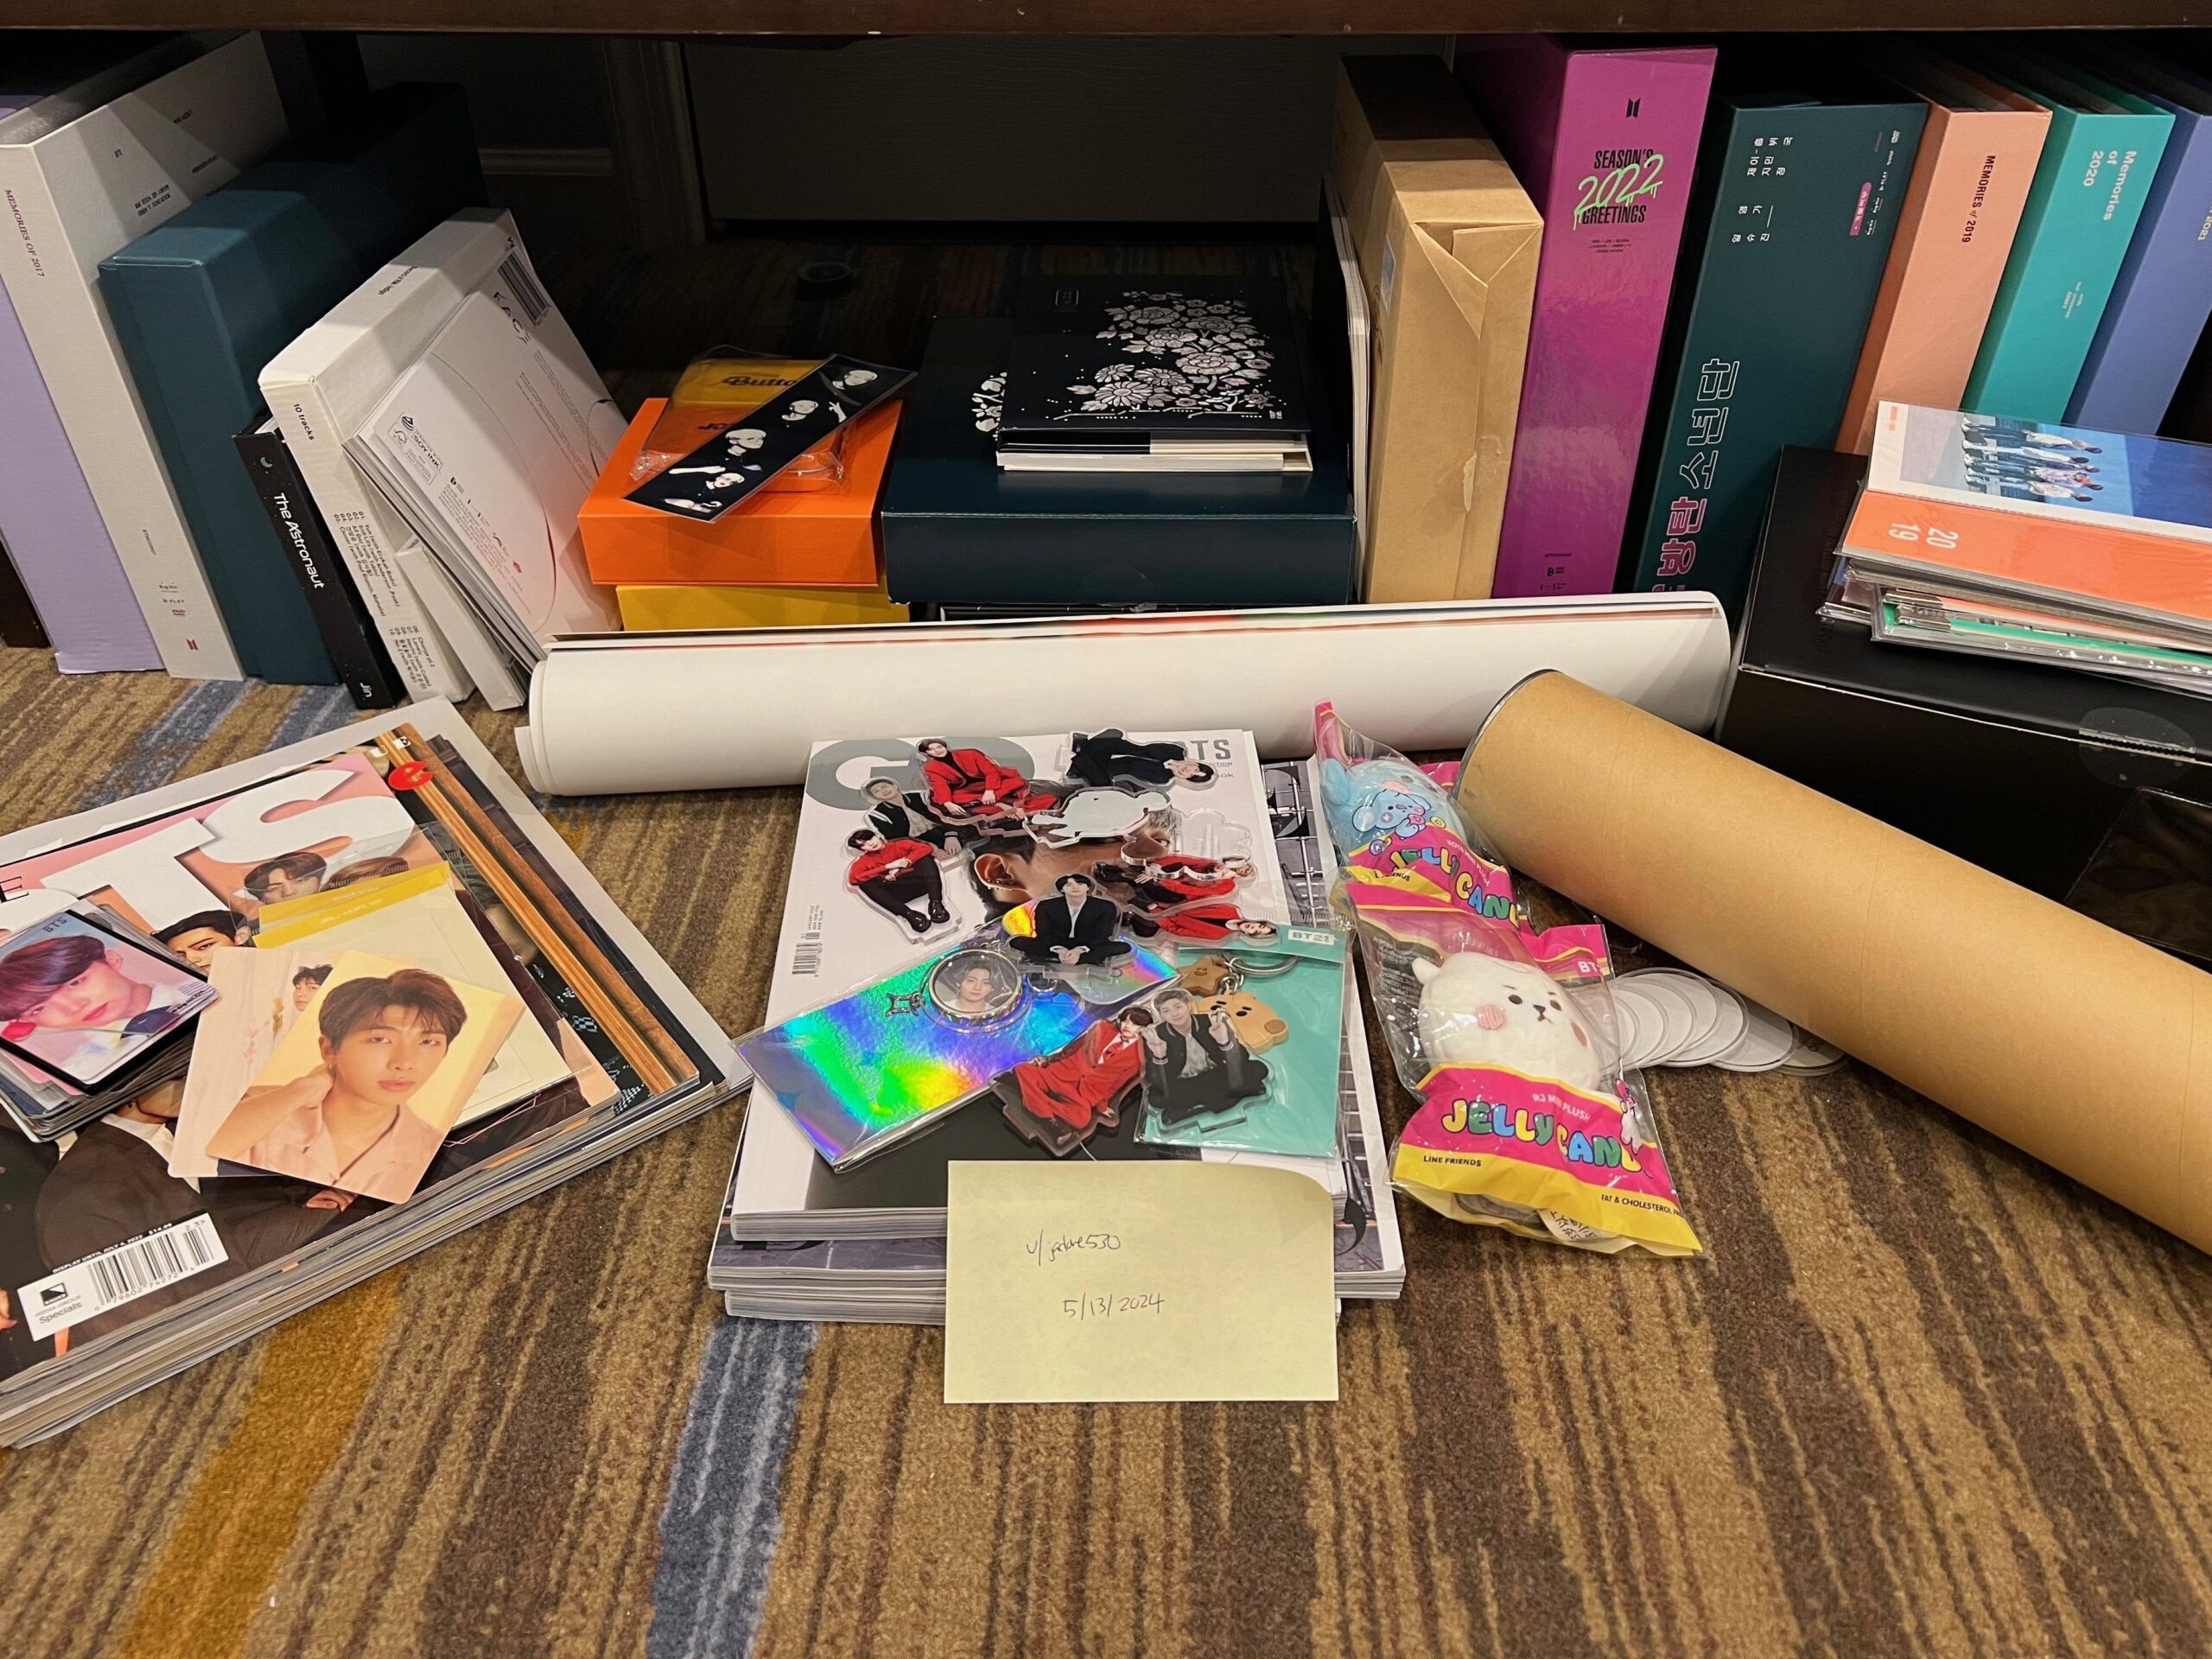 [WTS] [US/WW] DVDs, magazines, photocards, etc!